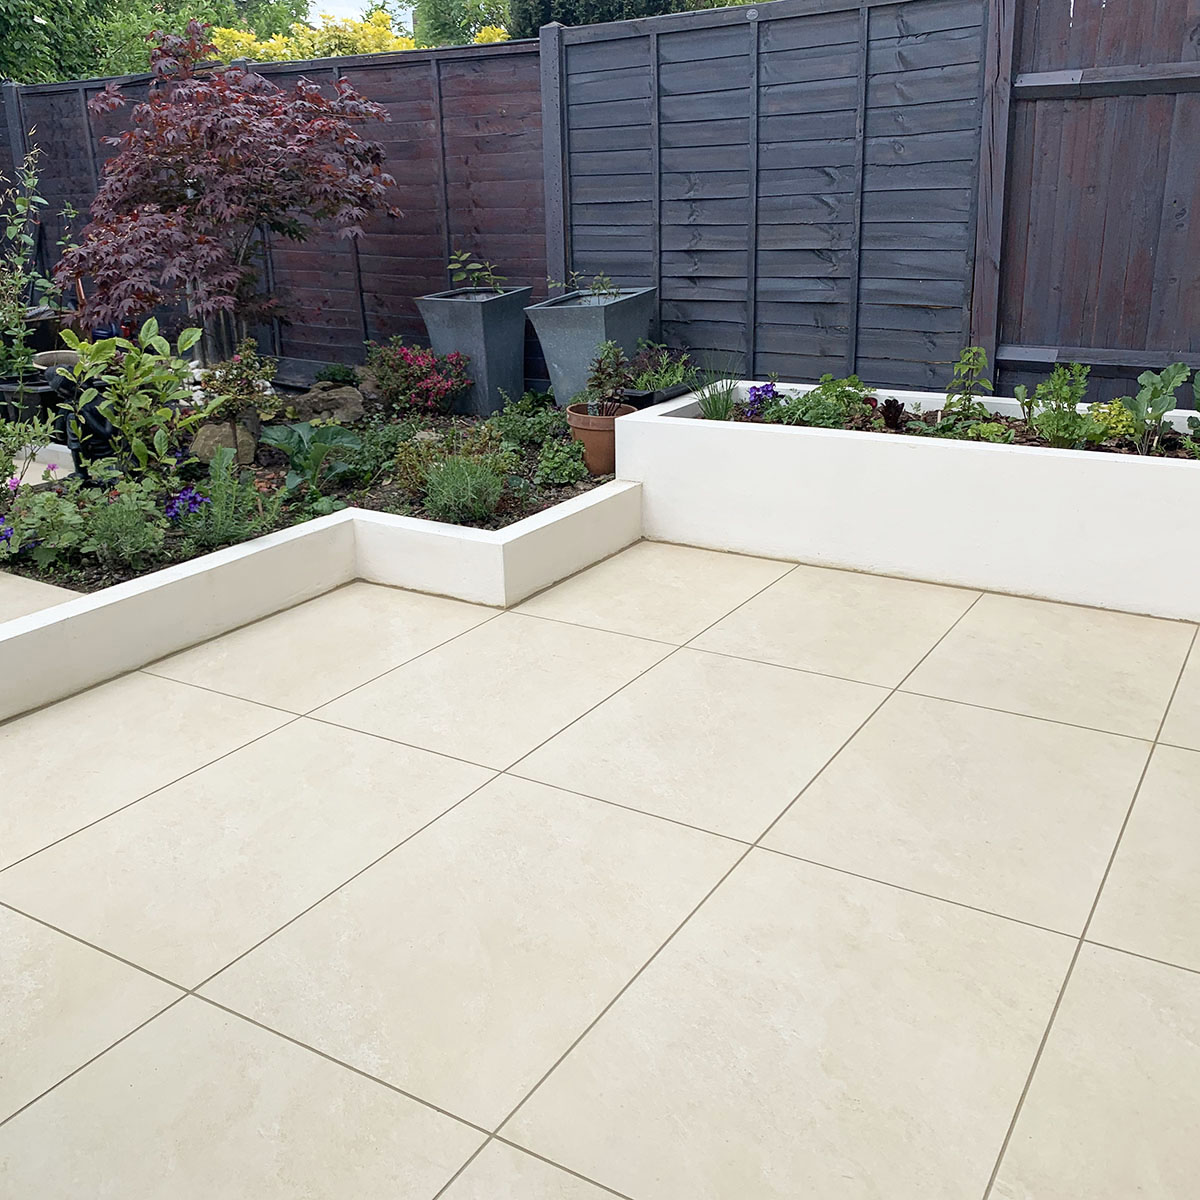 Paving For Your Patio, What Are The Best Patio Slabs To Use